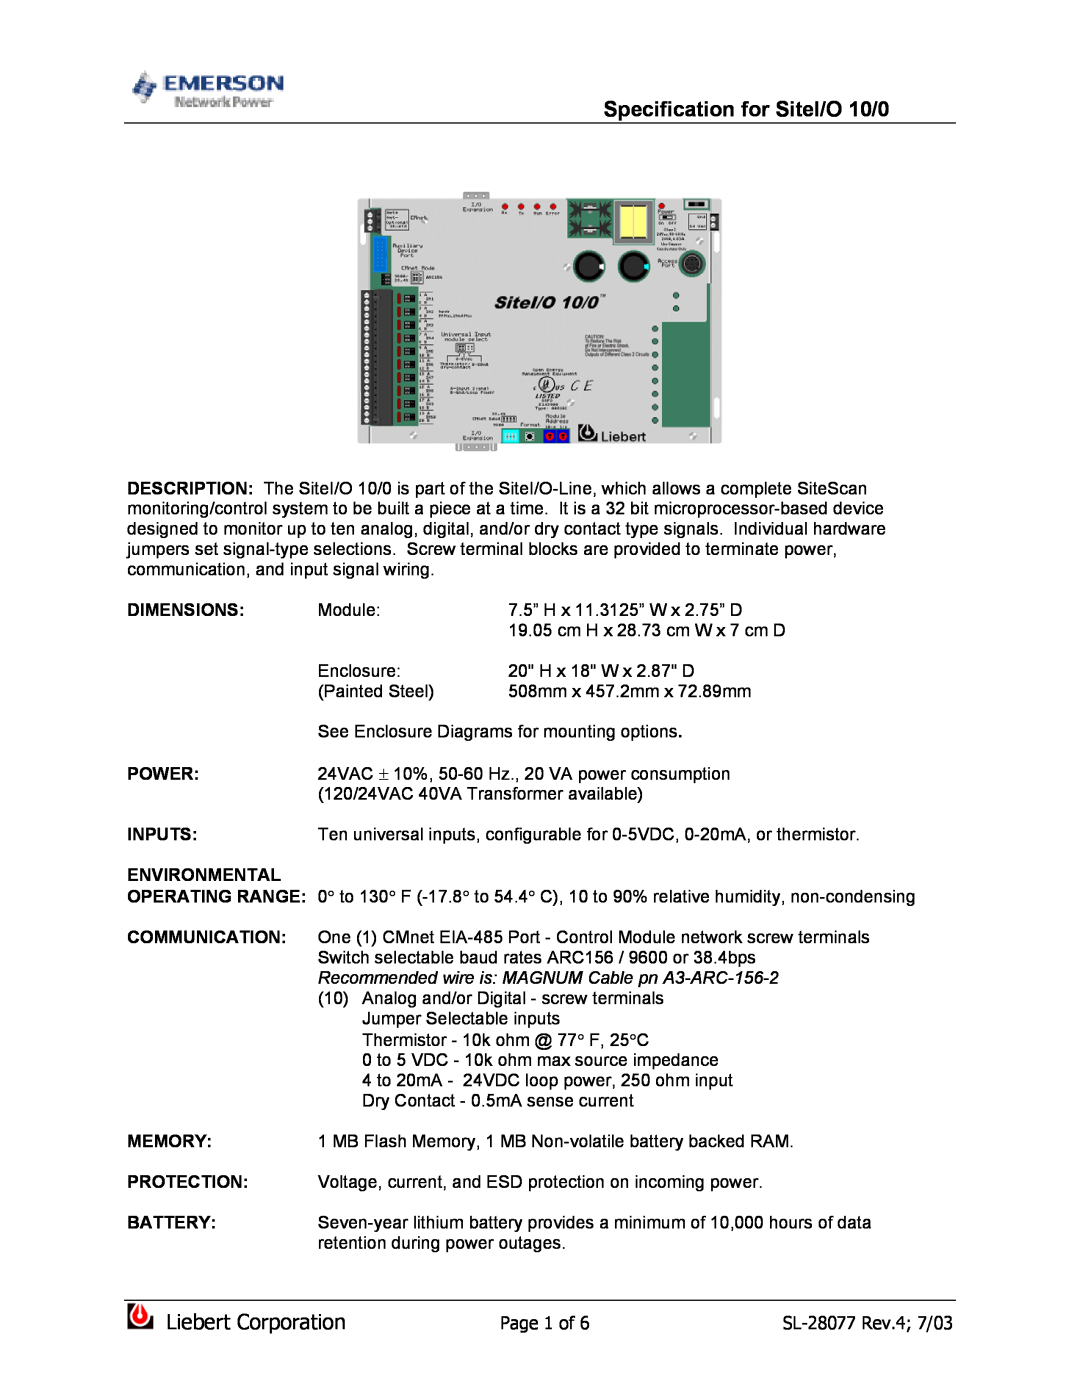 Emerson SiteI/O-Line dimensions Specification for SiteI/O 10/0, Liebert Corporation 